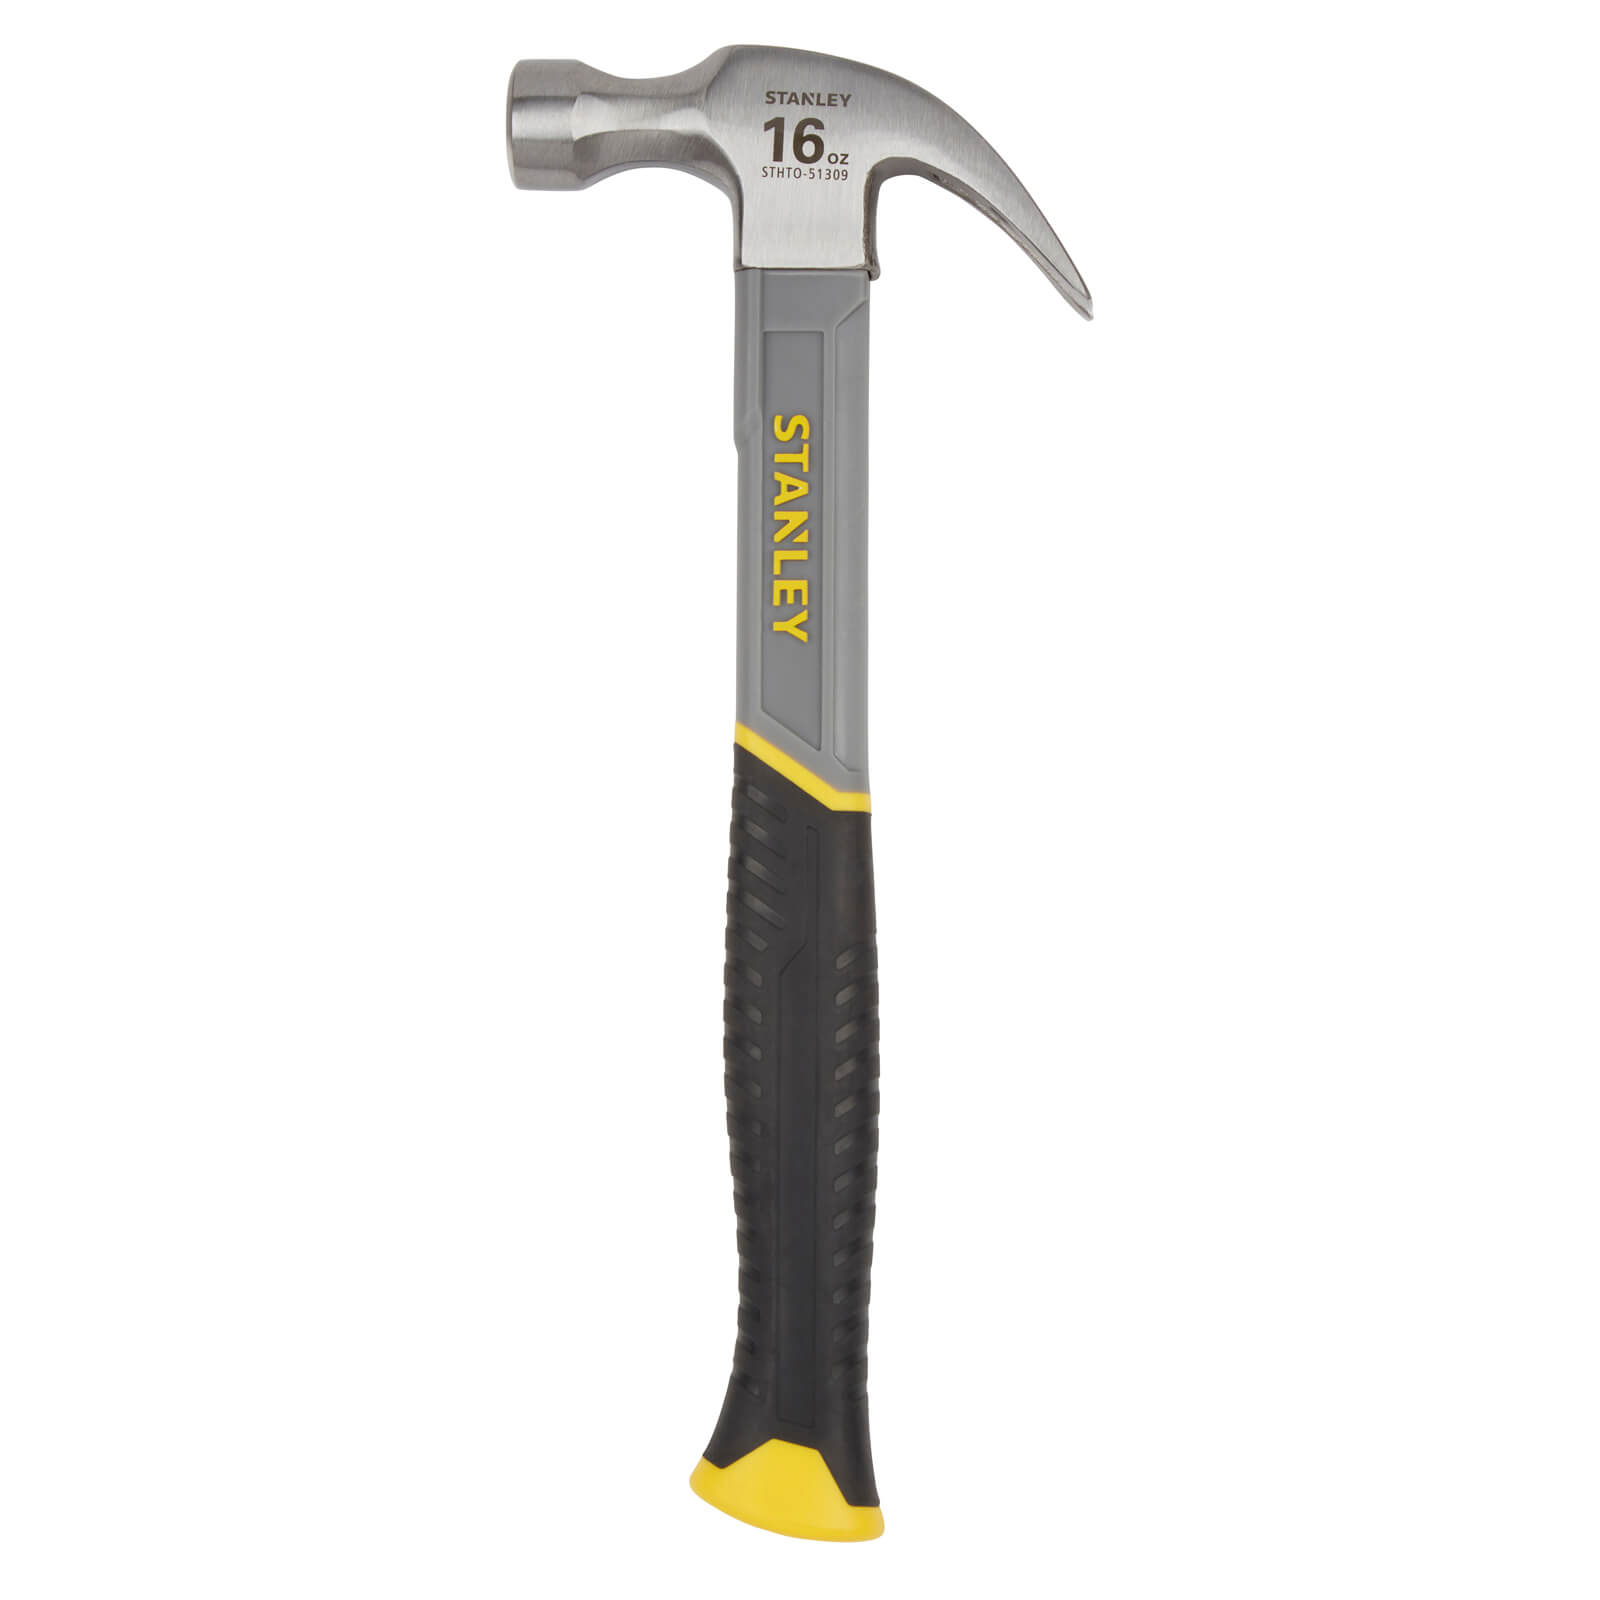 Photo of Stanley Fibreglass Curved Claw Hammer - 16oz